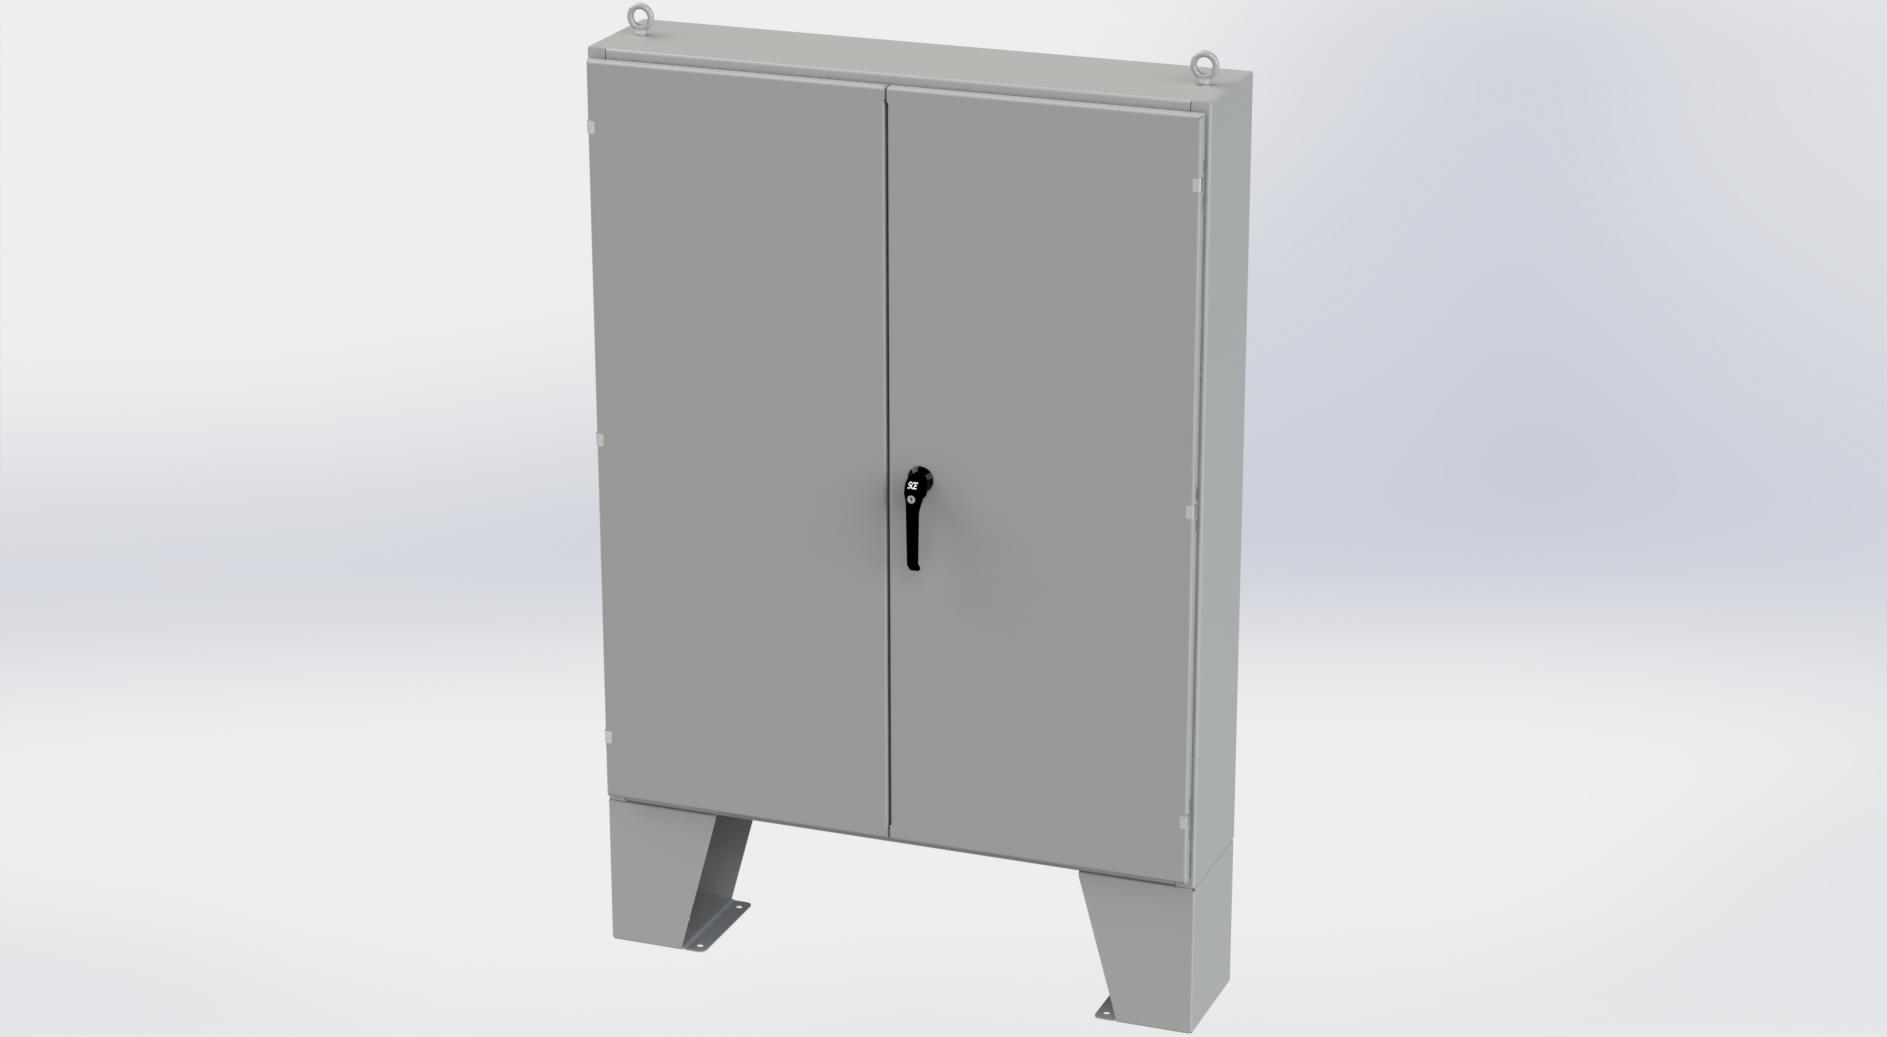 Saginaw Control SCE-604810LP 2DR LP Enclosure, Height:60.00", Width:48.00", Depth:10.00", ANSI-61 gray powder coating inside and out. Optional sub-panels are powder coated white.